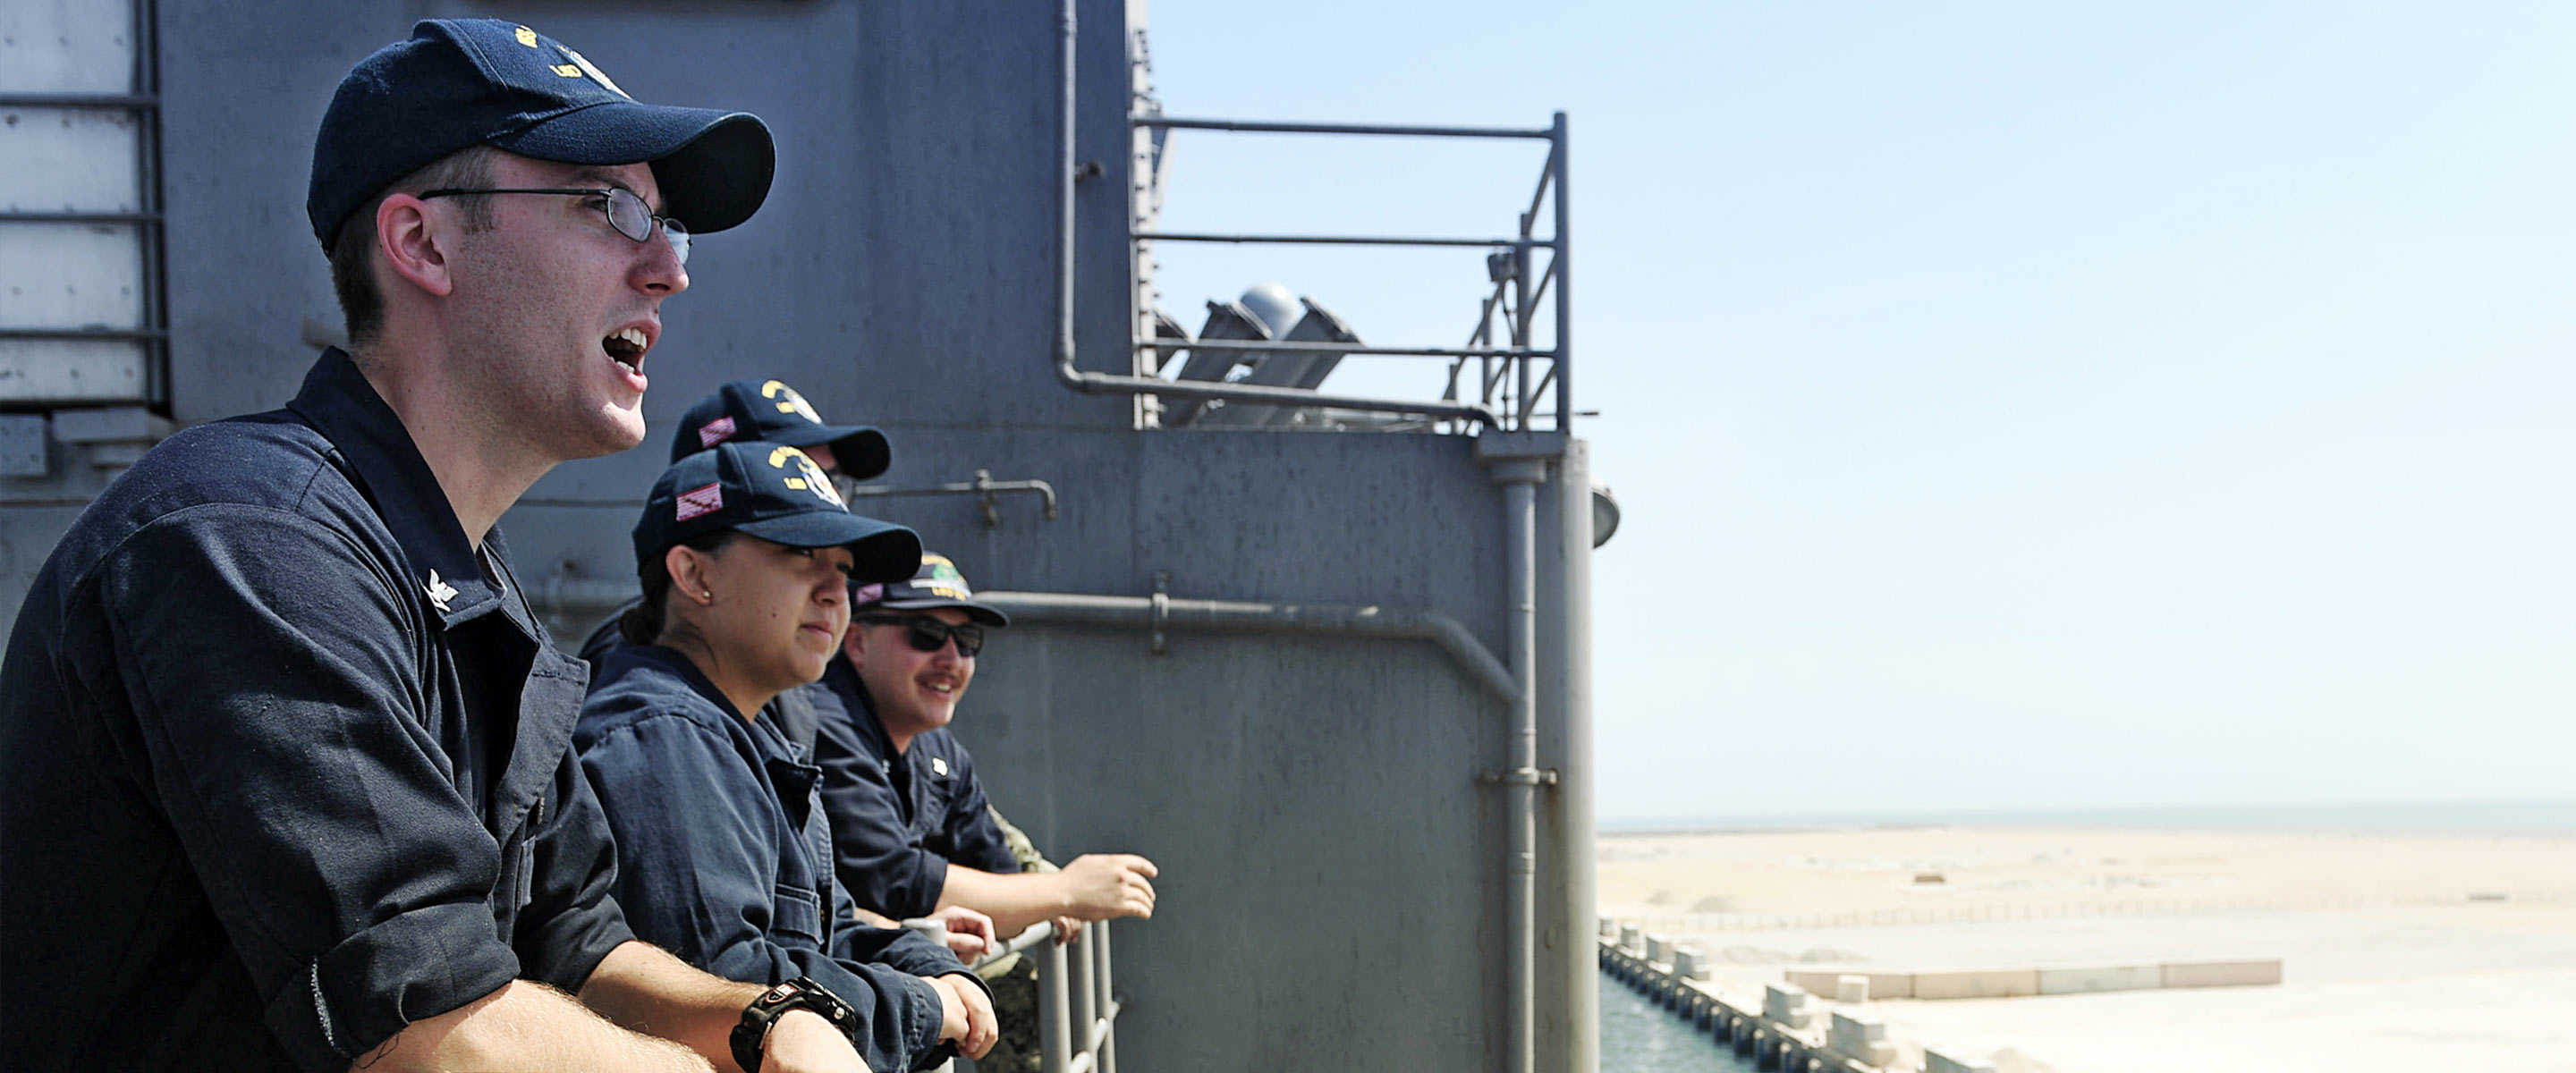 A group of Navy Reserve Sailors spend time together 